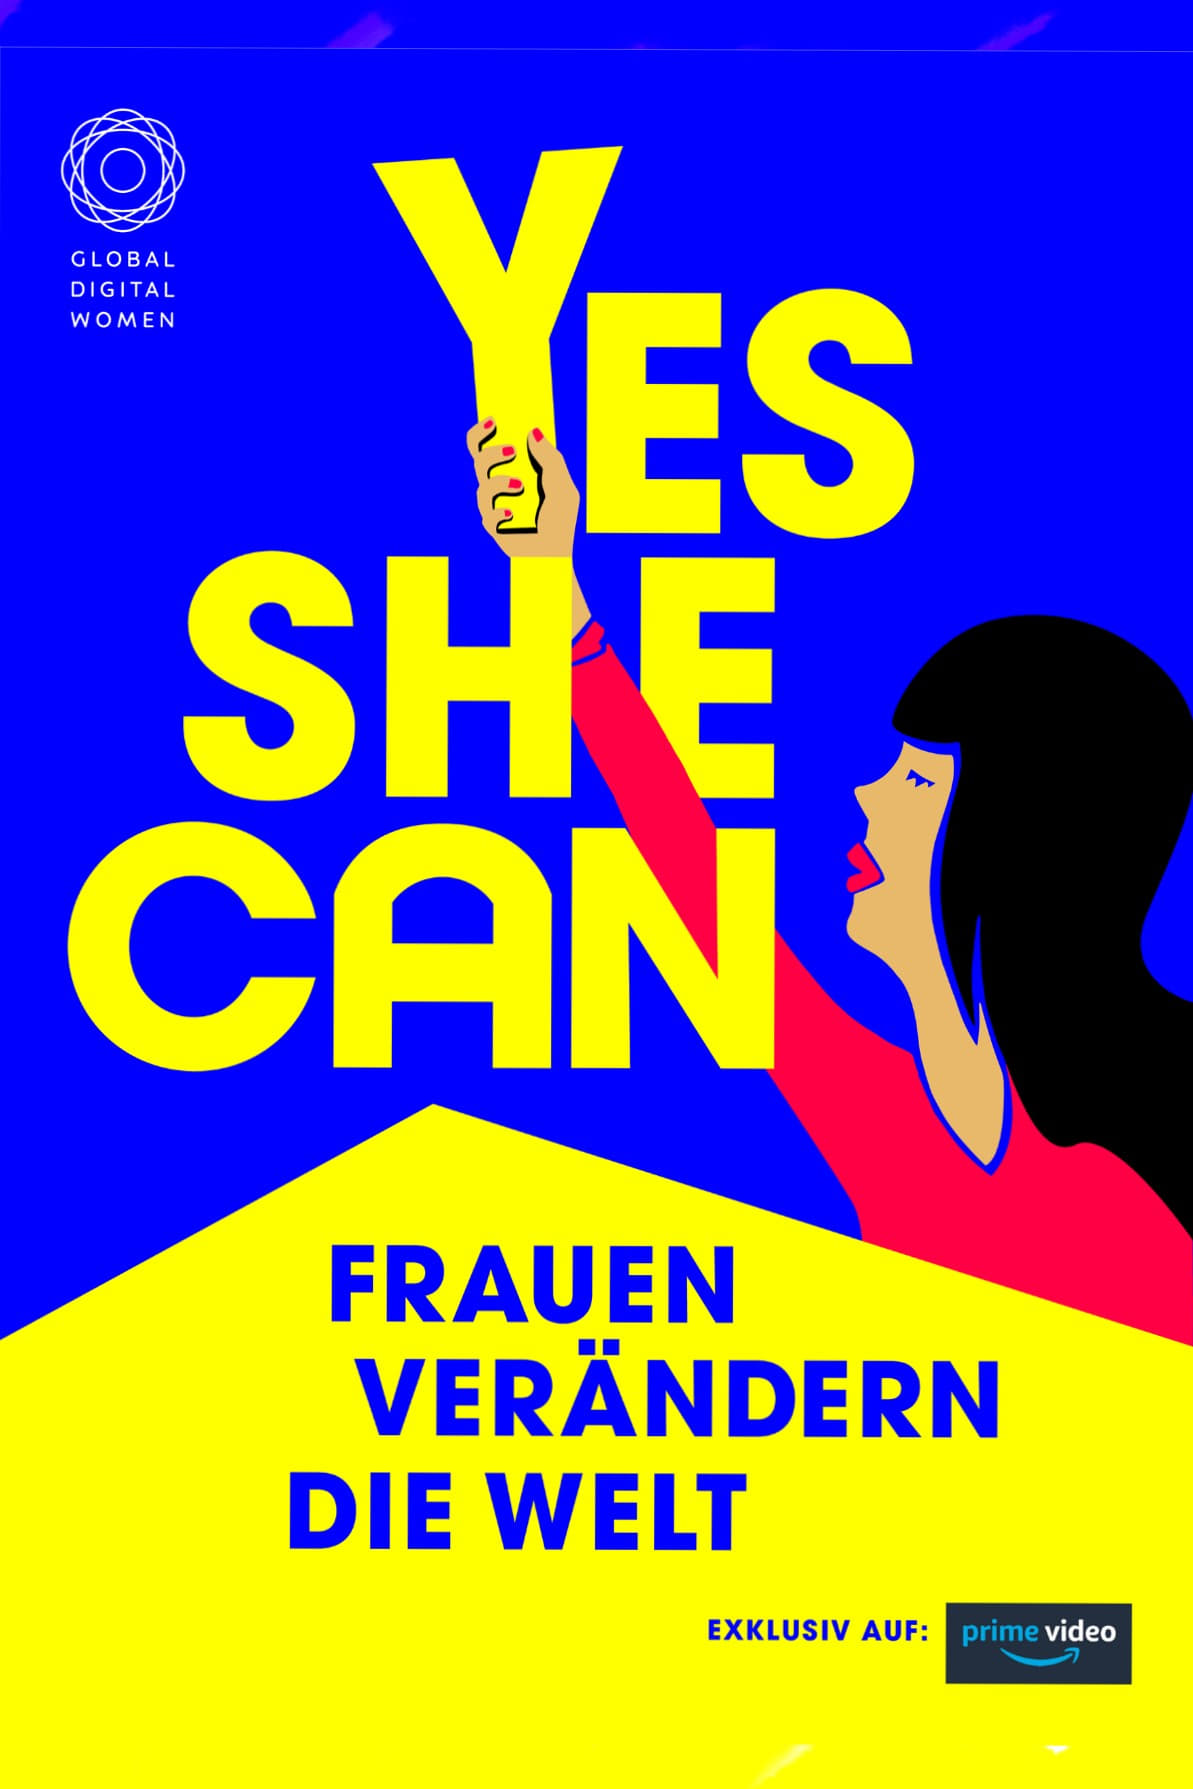 YES SHE CAN - Women Change The World